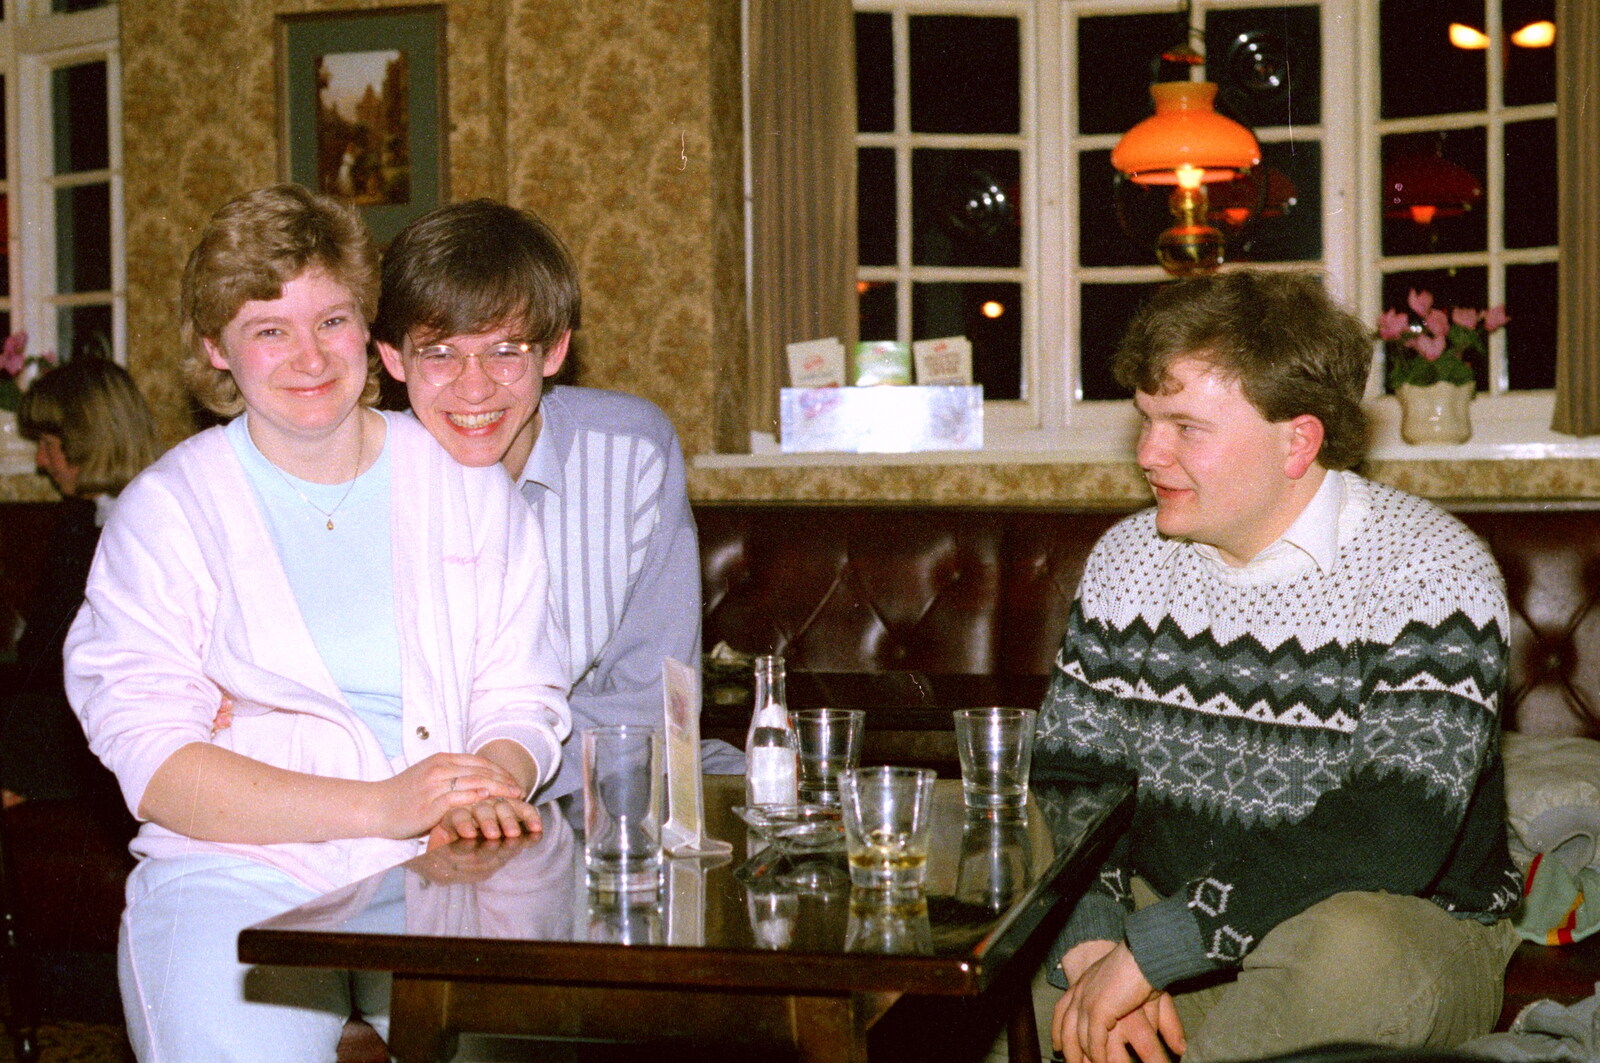 Anna, Phil and Hamish from Easter With Sean in Macclesfield, Cheshire - 6th April 1986